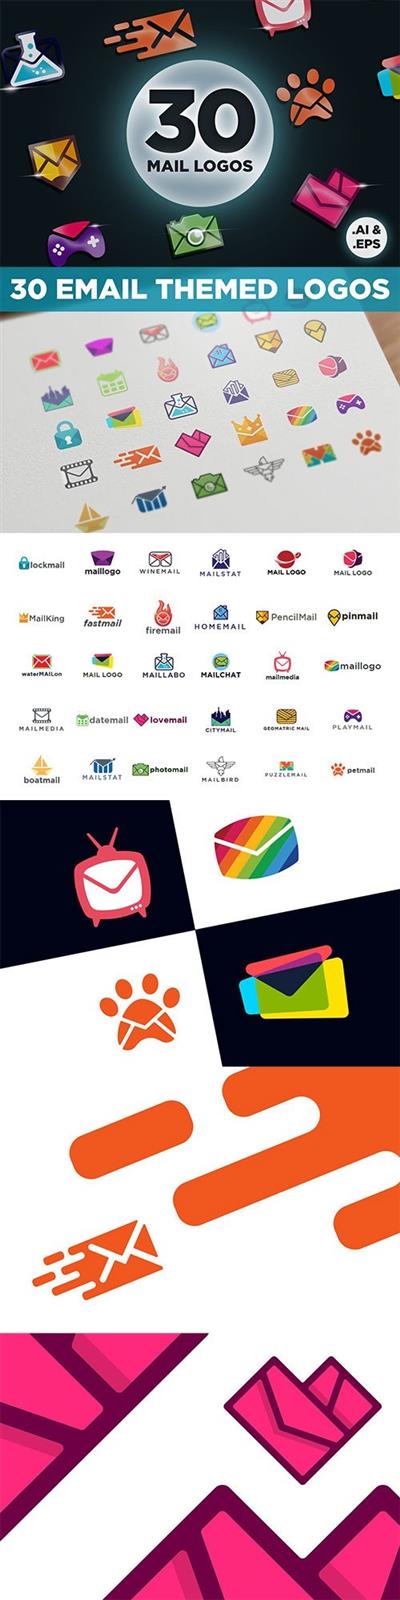 30 Modern Clever Email Themed Logo